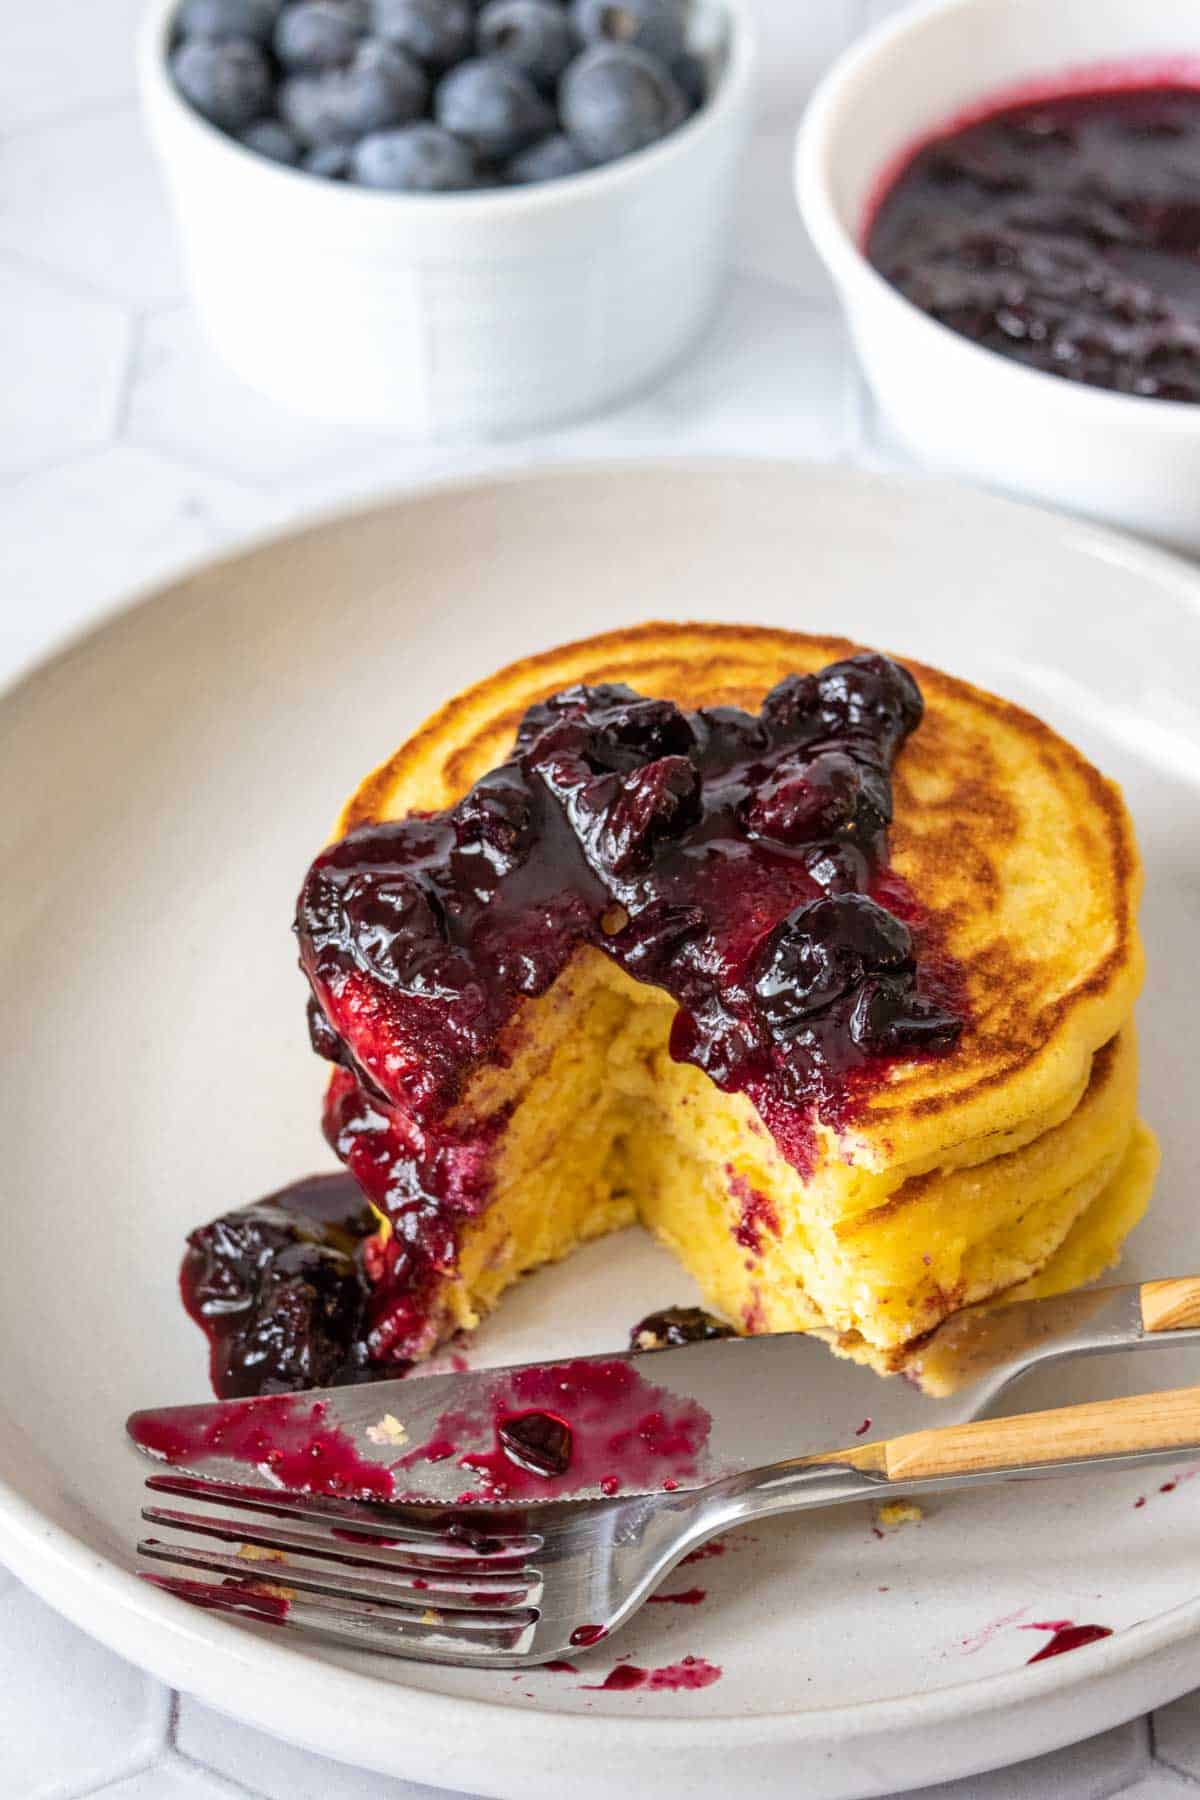 Cornmeal pancakes on a plate with blueberry sauce, partially eaten.